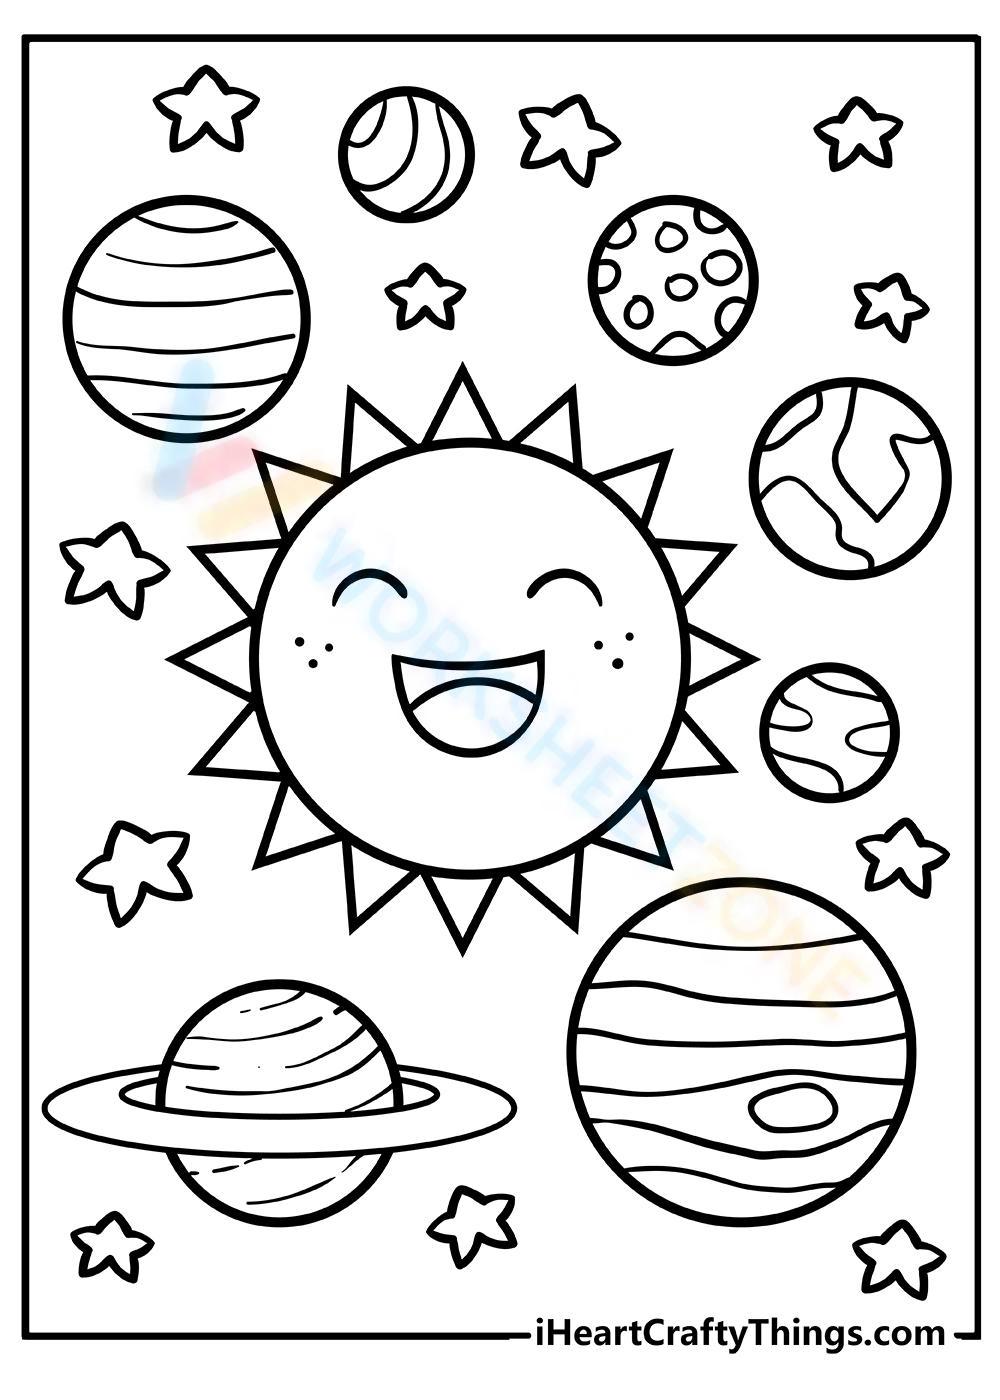 Solar system picture